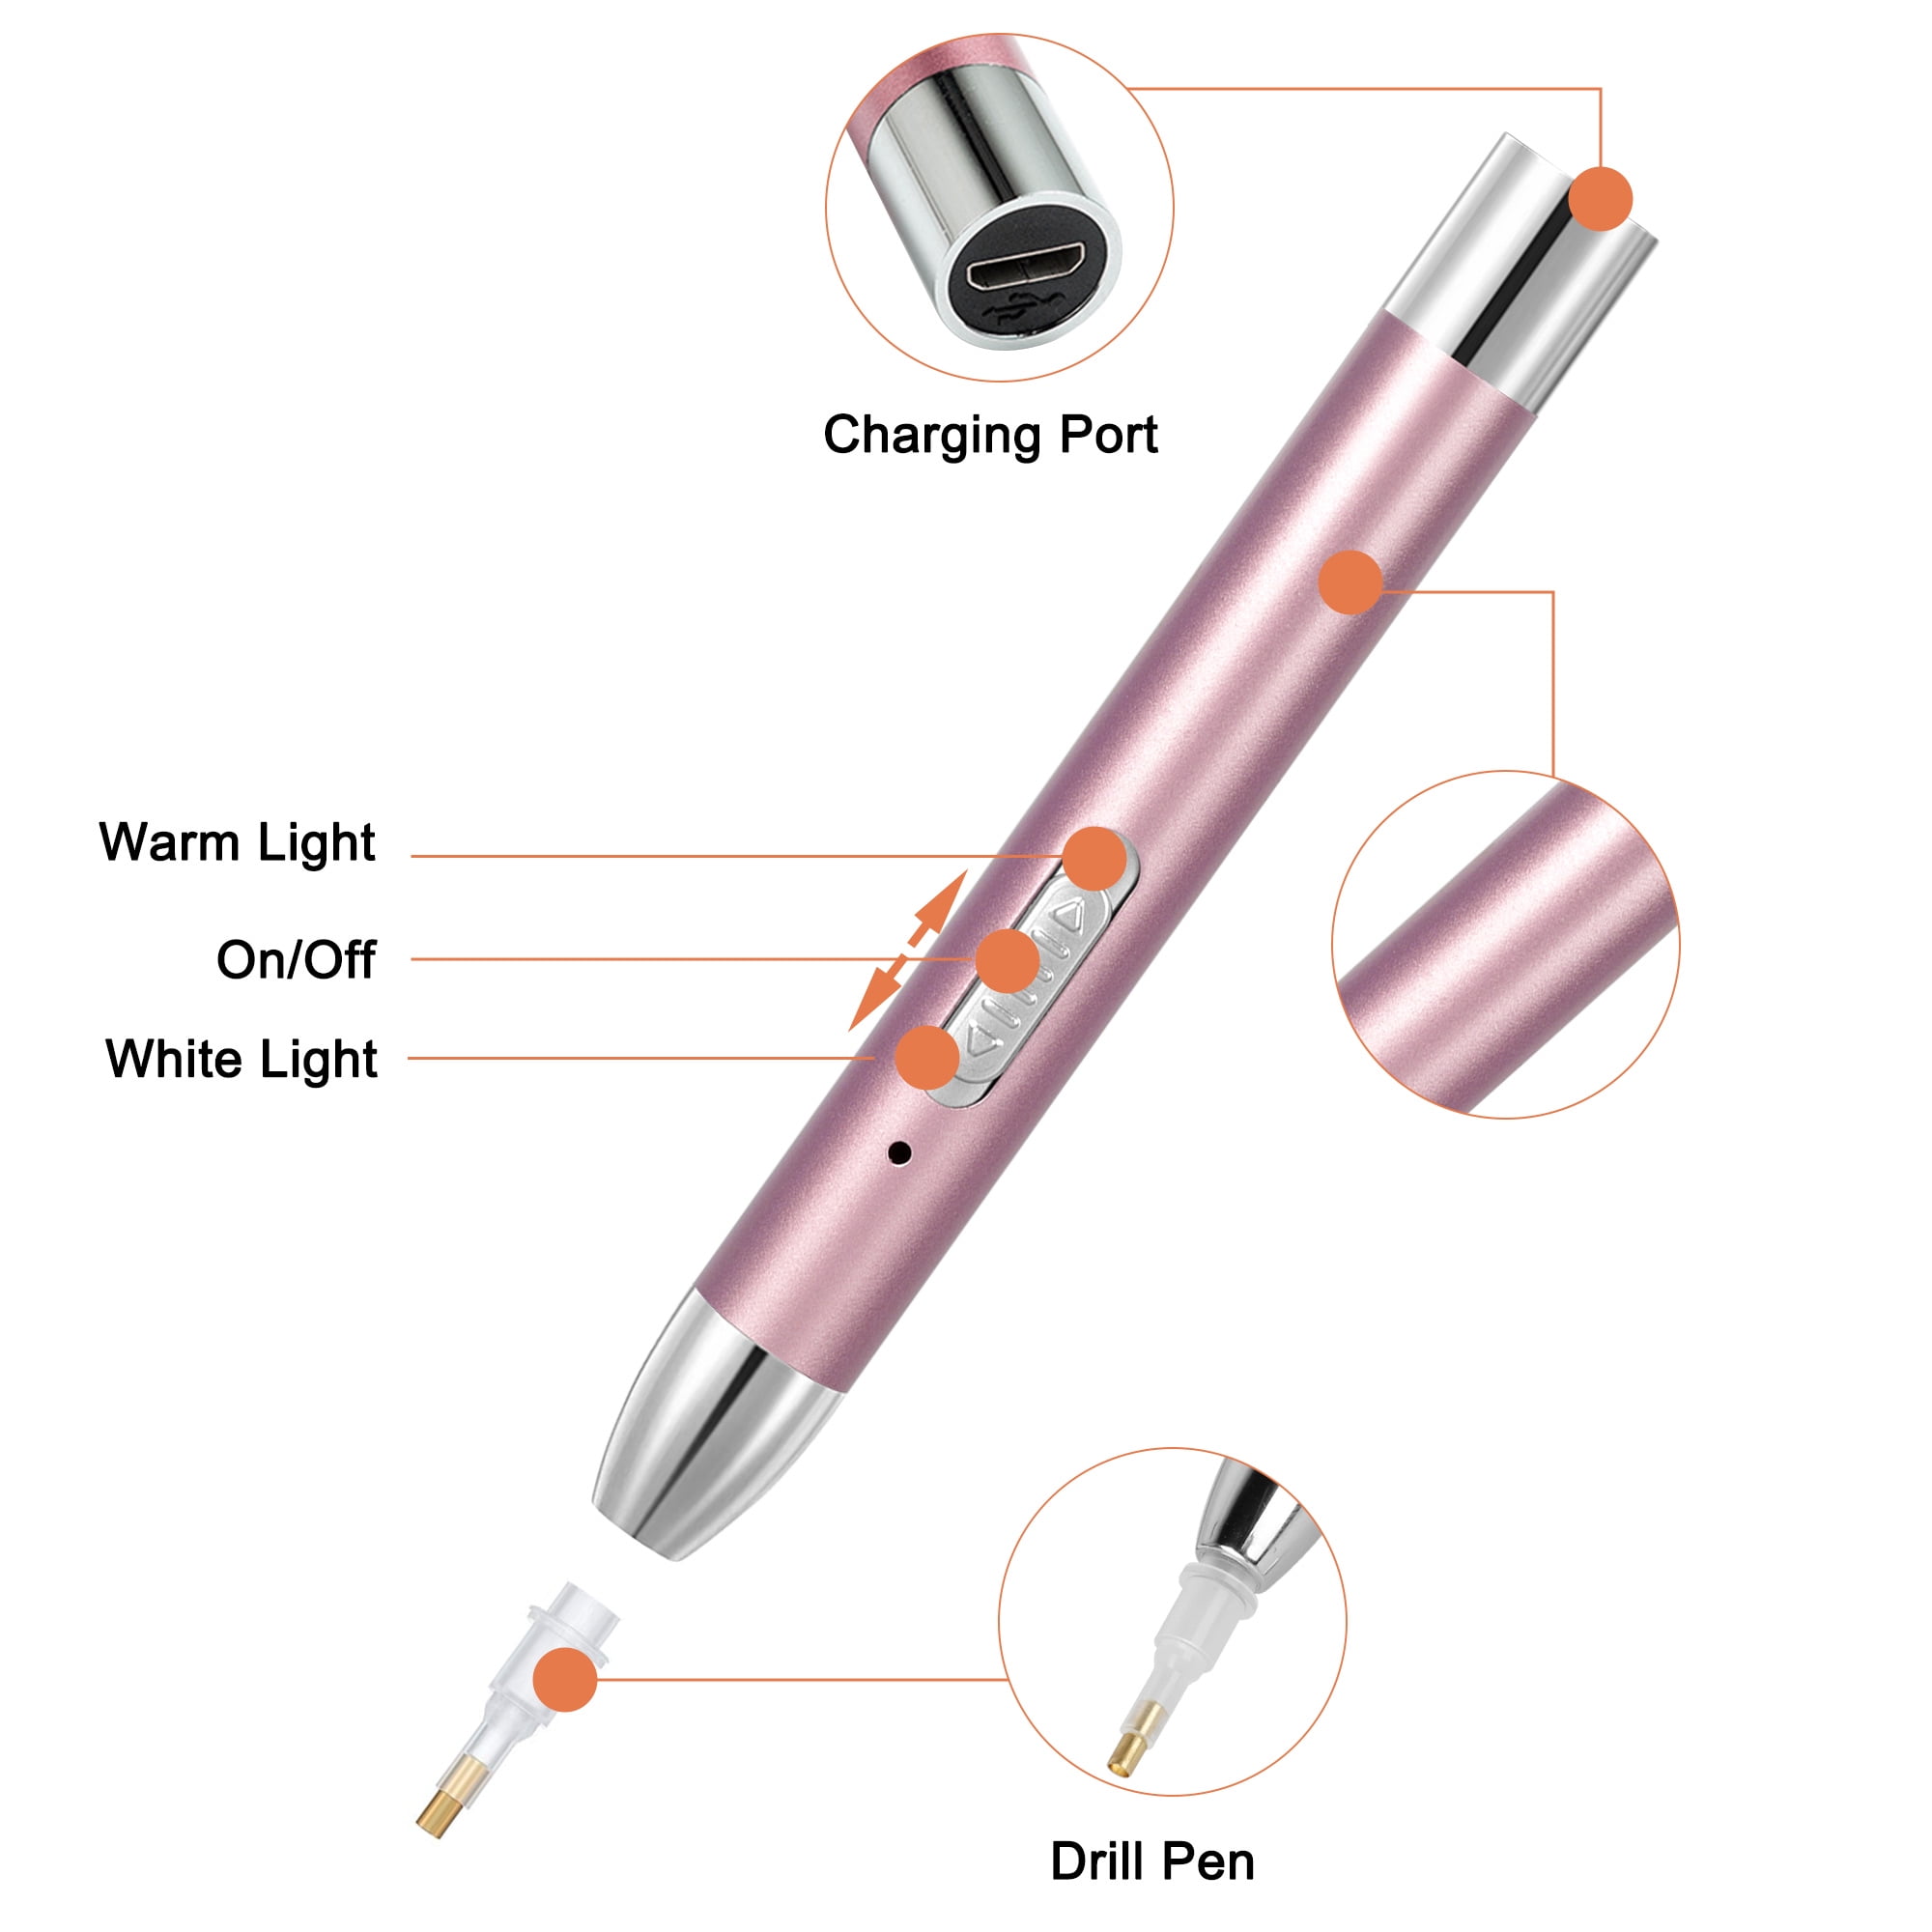  Hztyyier Diamond Painting Pen with Light, USB